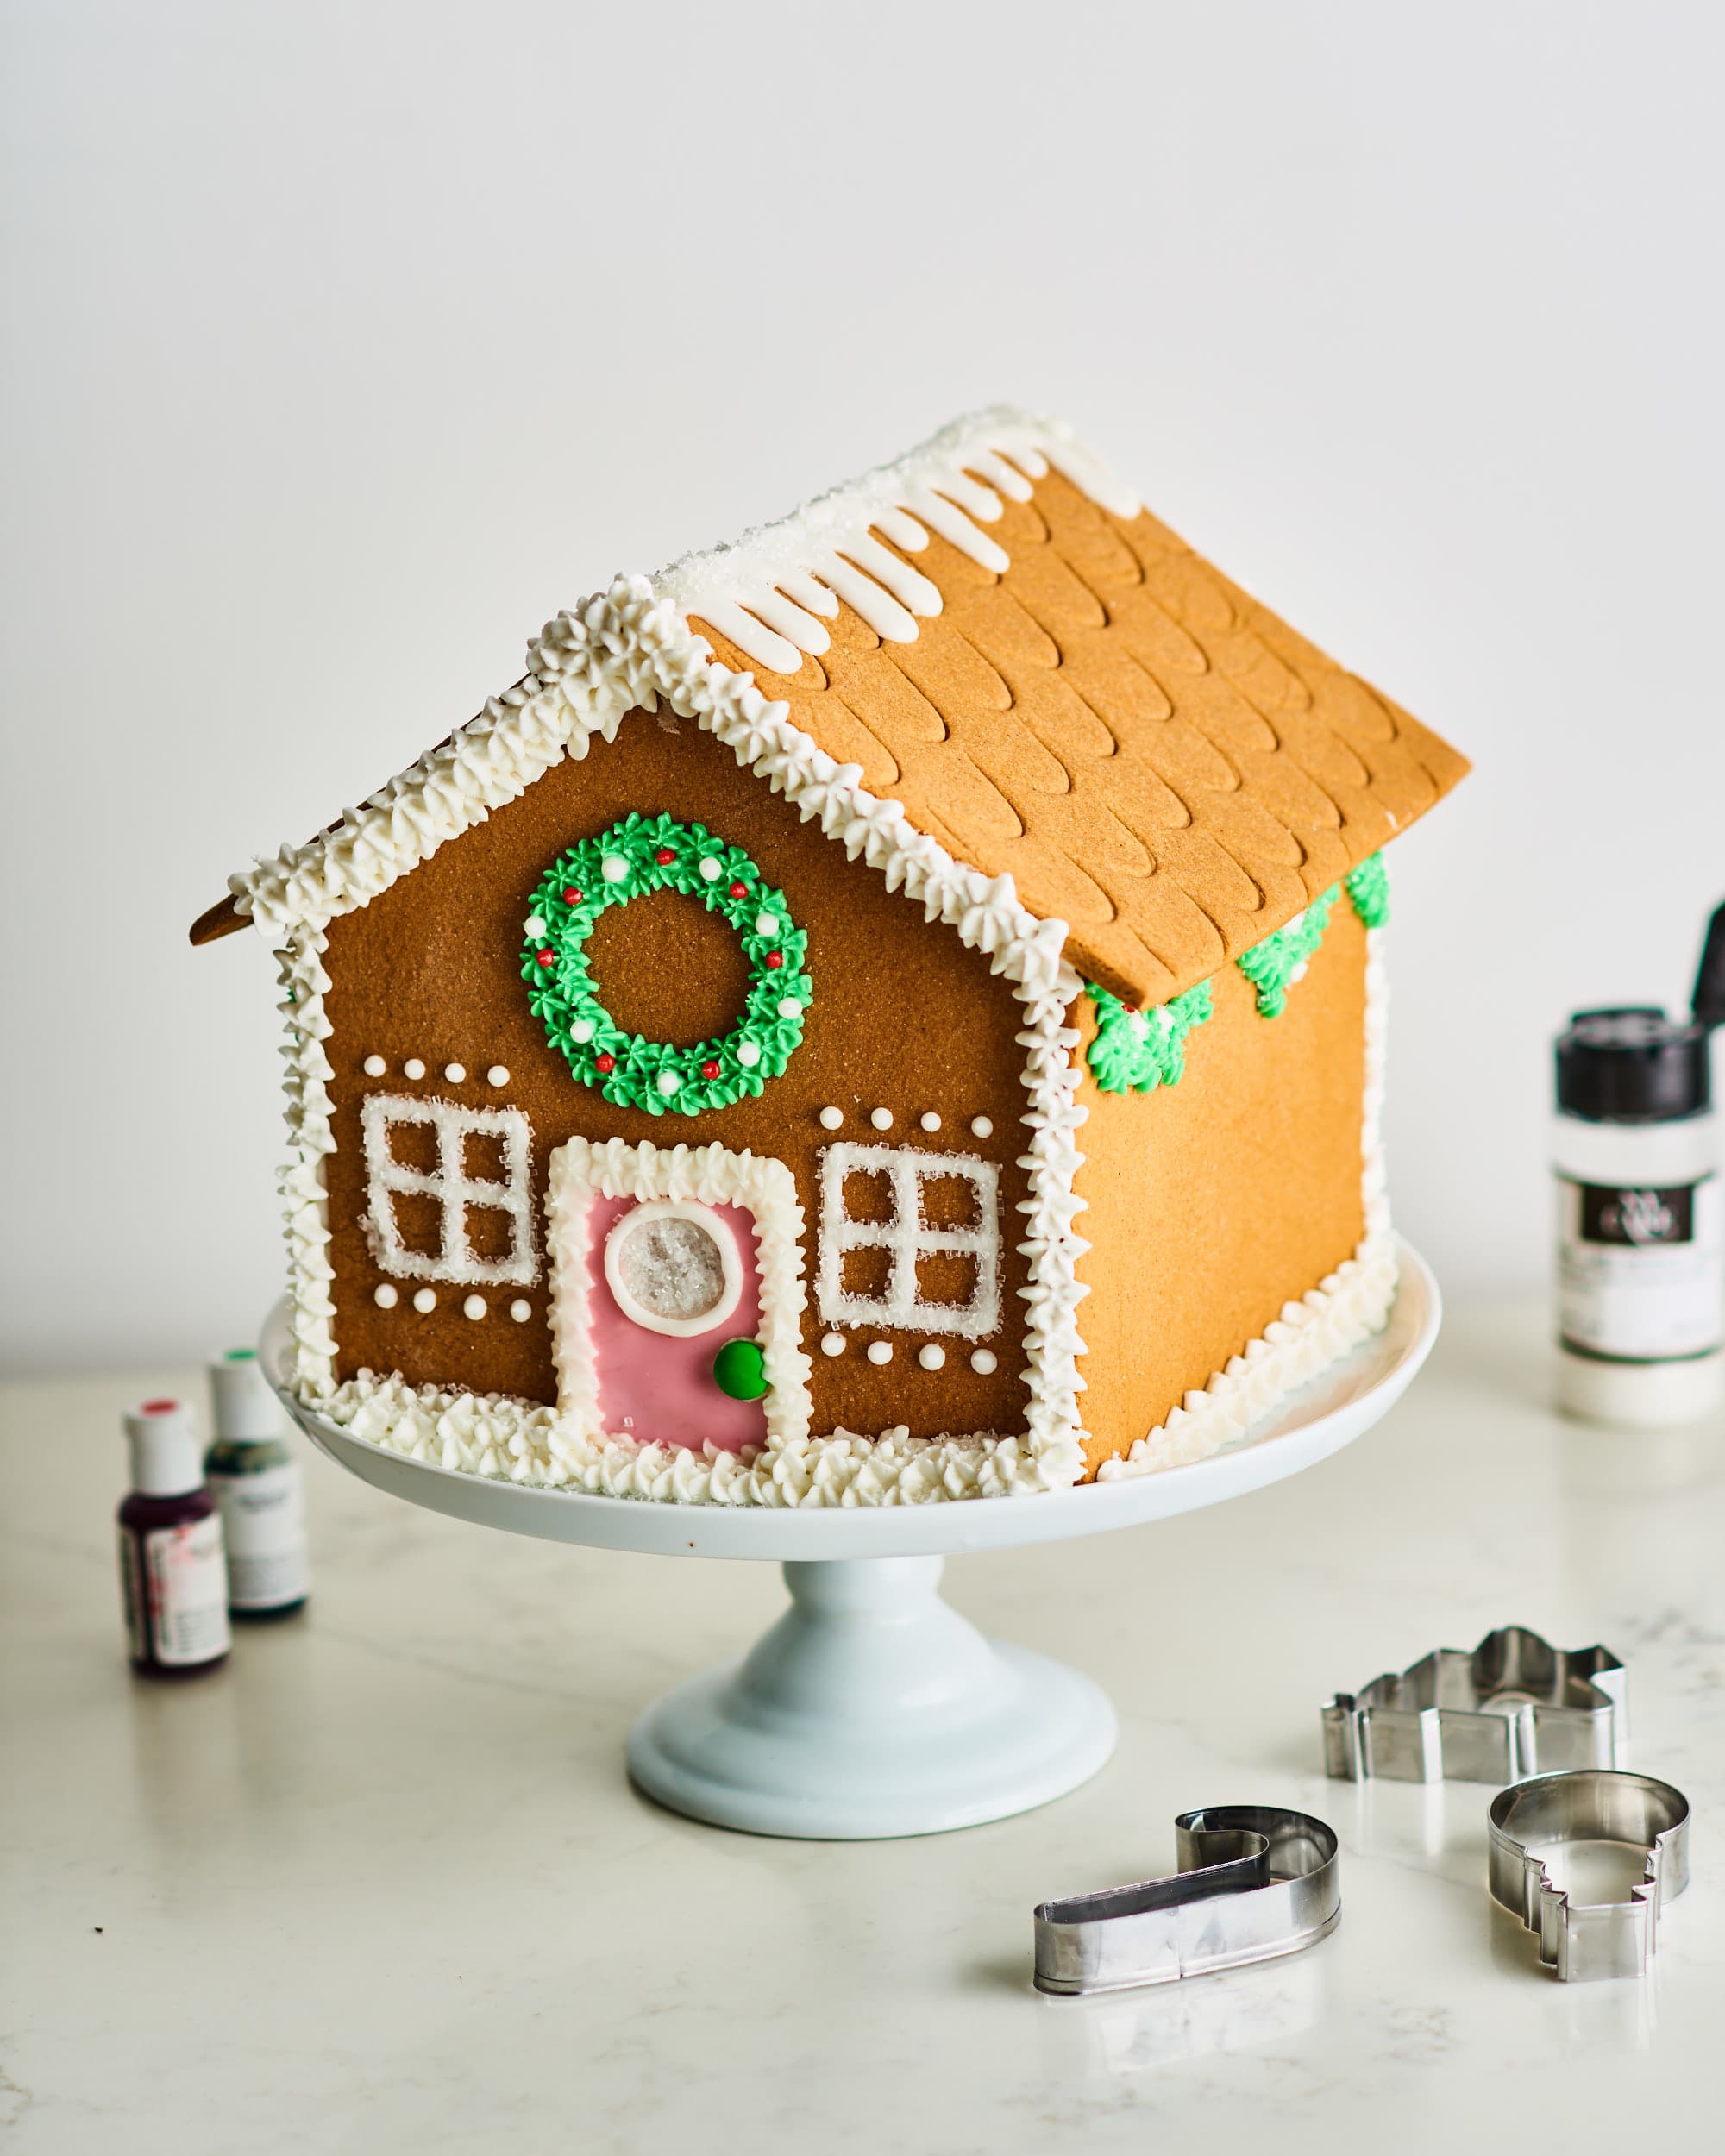 Gingerbread House Texture